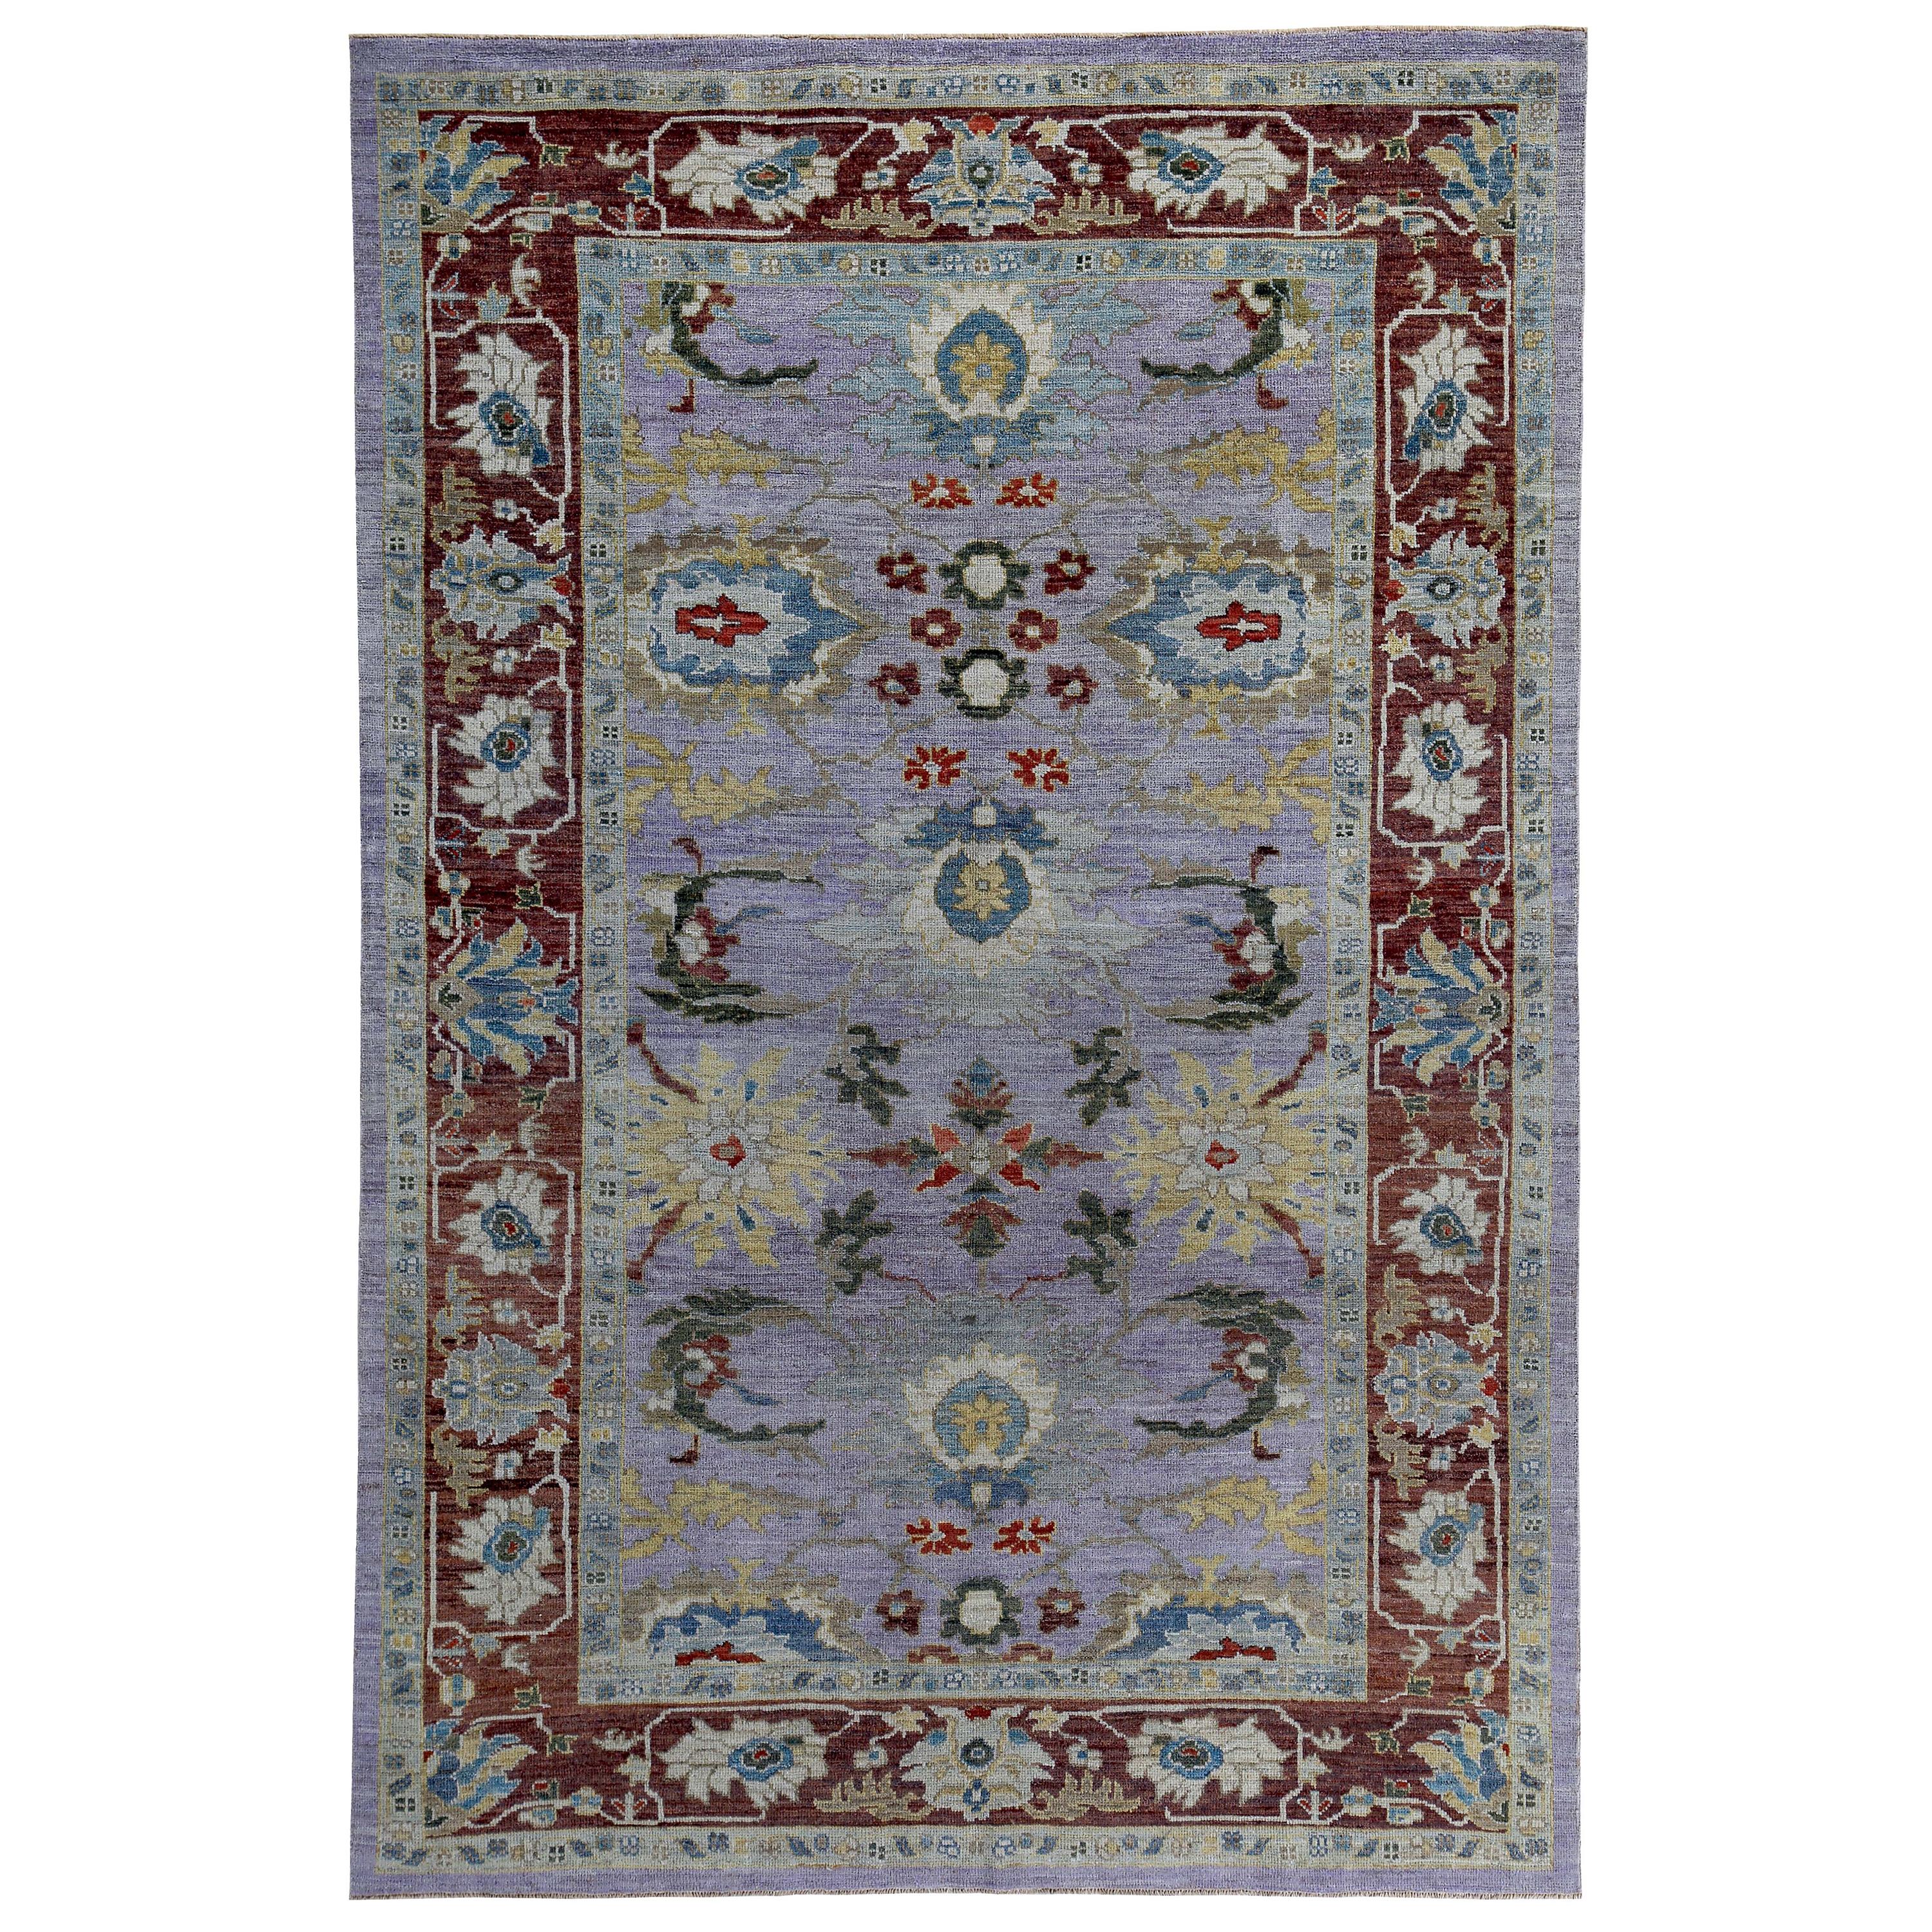 New Turkish Rug Sultanabad Design with Brown, Blue and Purple Botanical Details